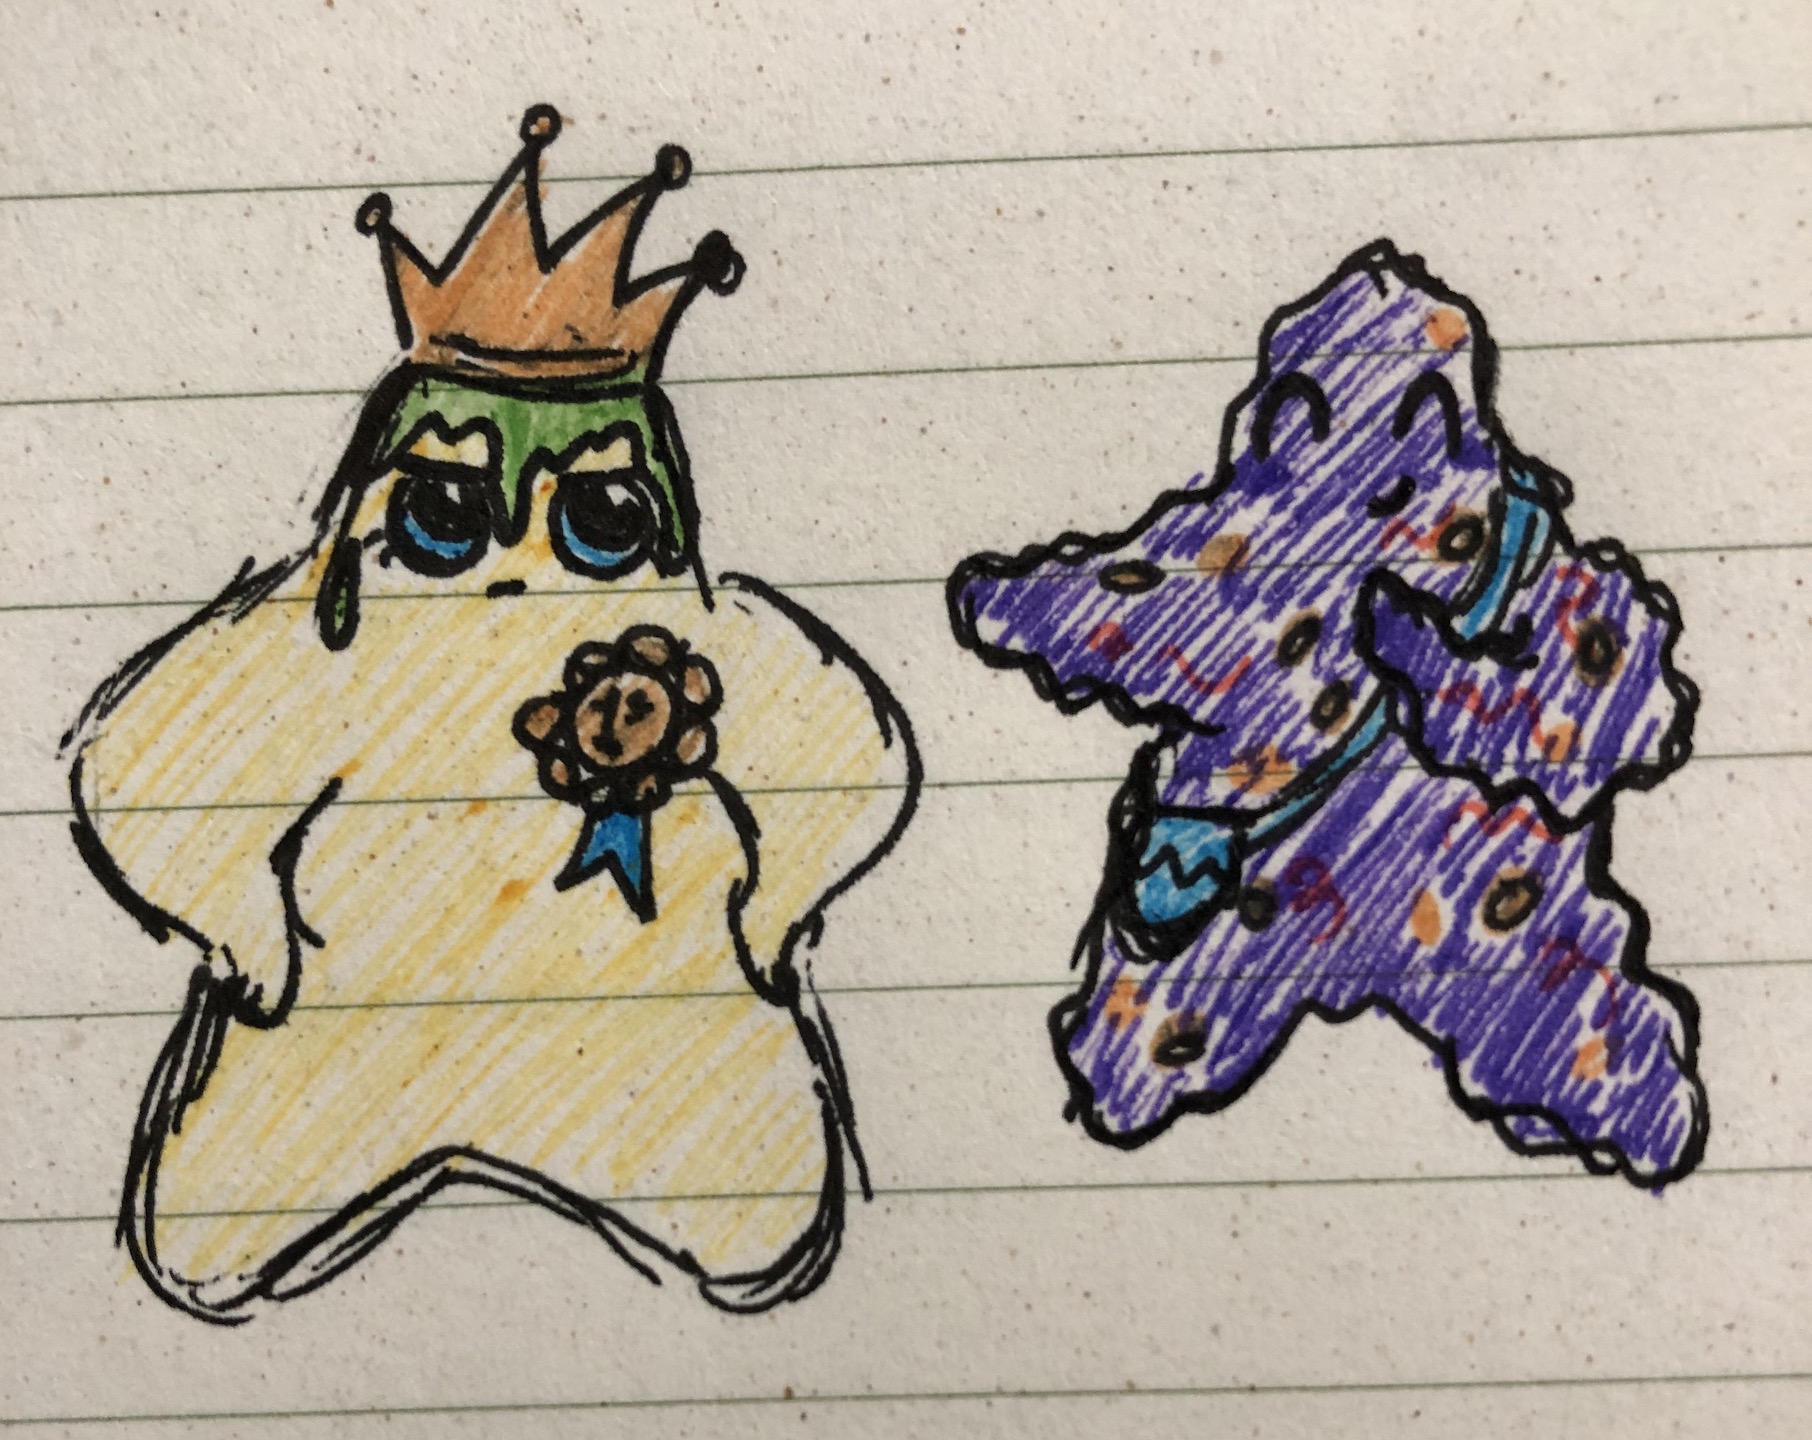 First star looks annoyed as green goo oozes from his crown. Crooked star is laughing at the prank